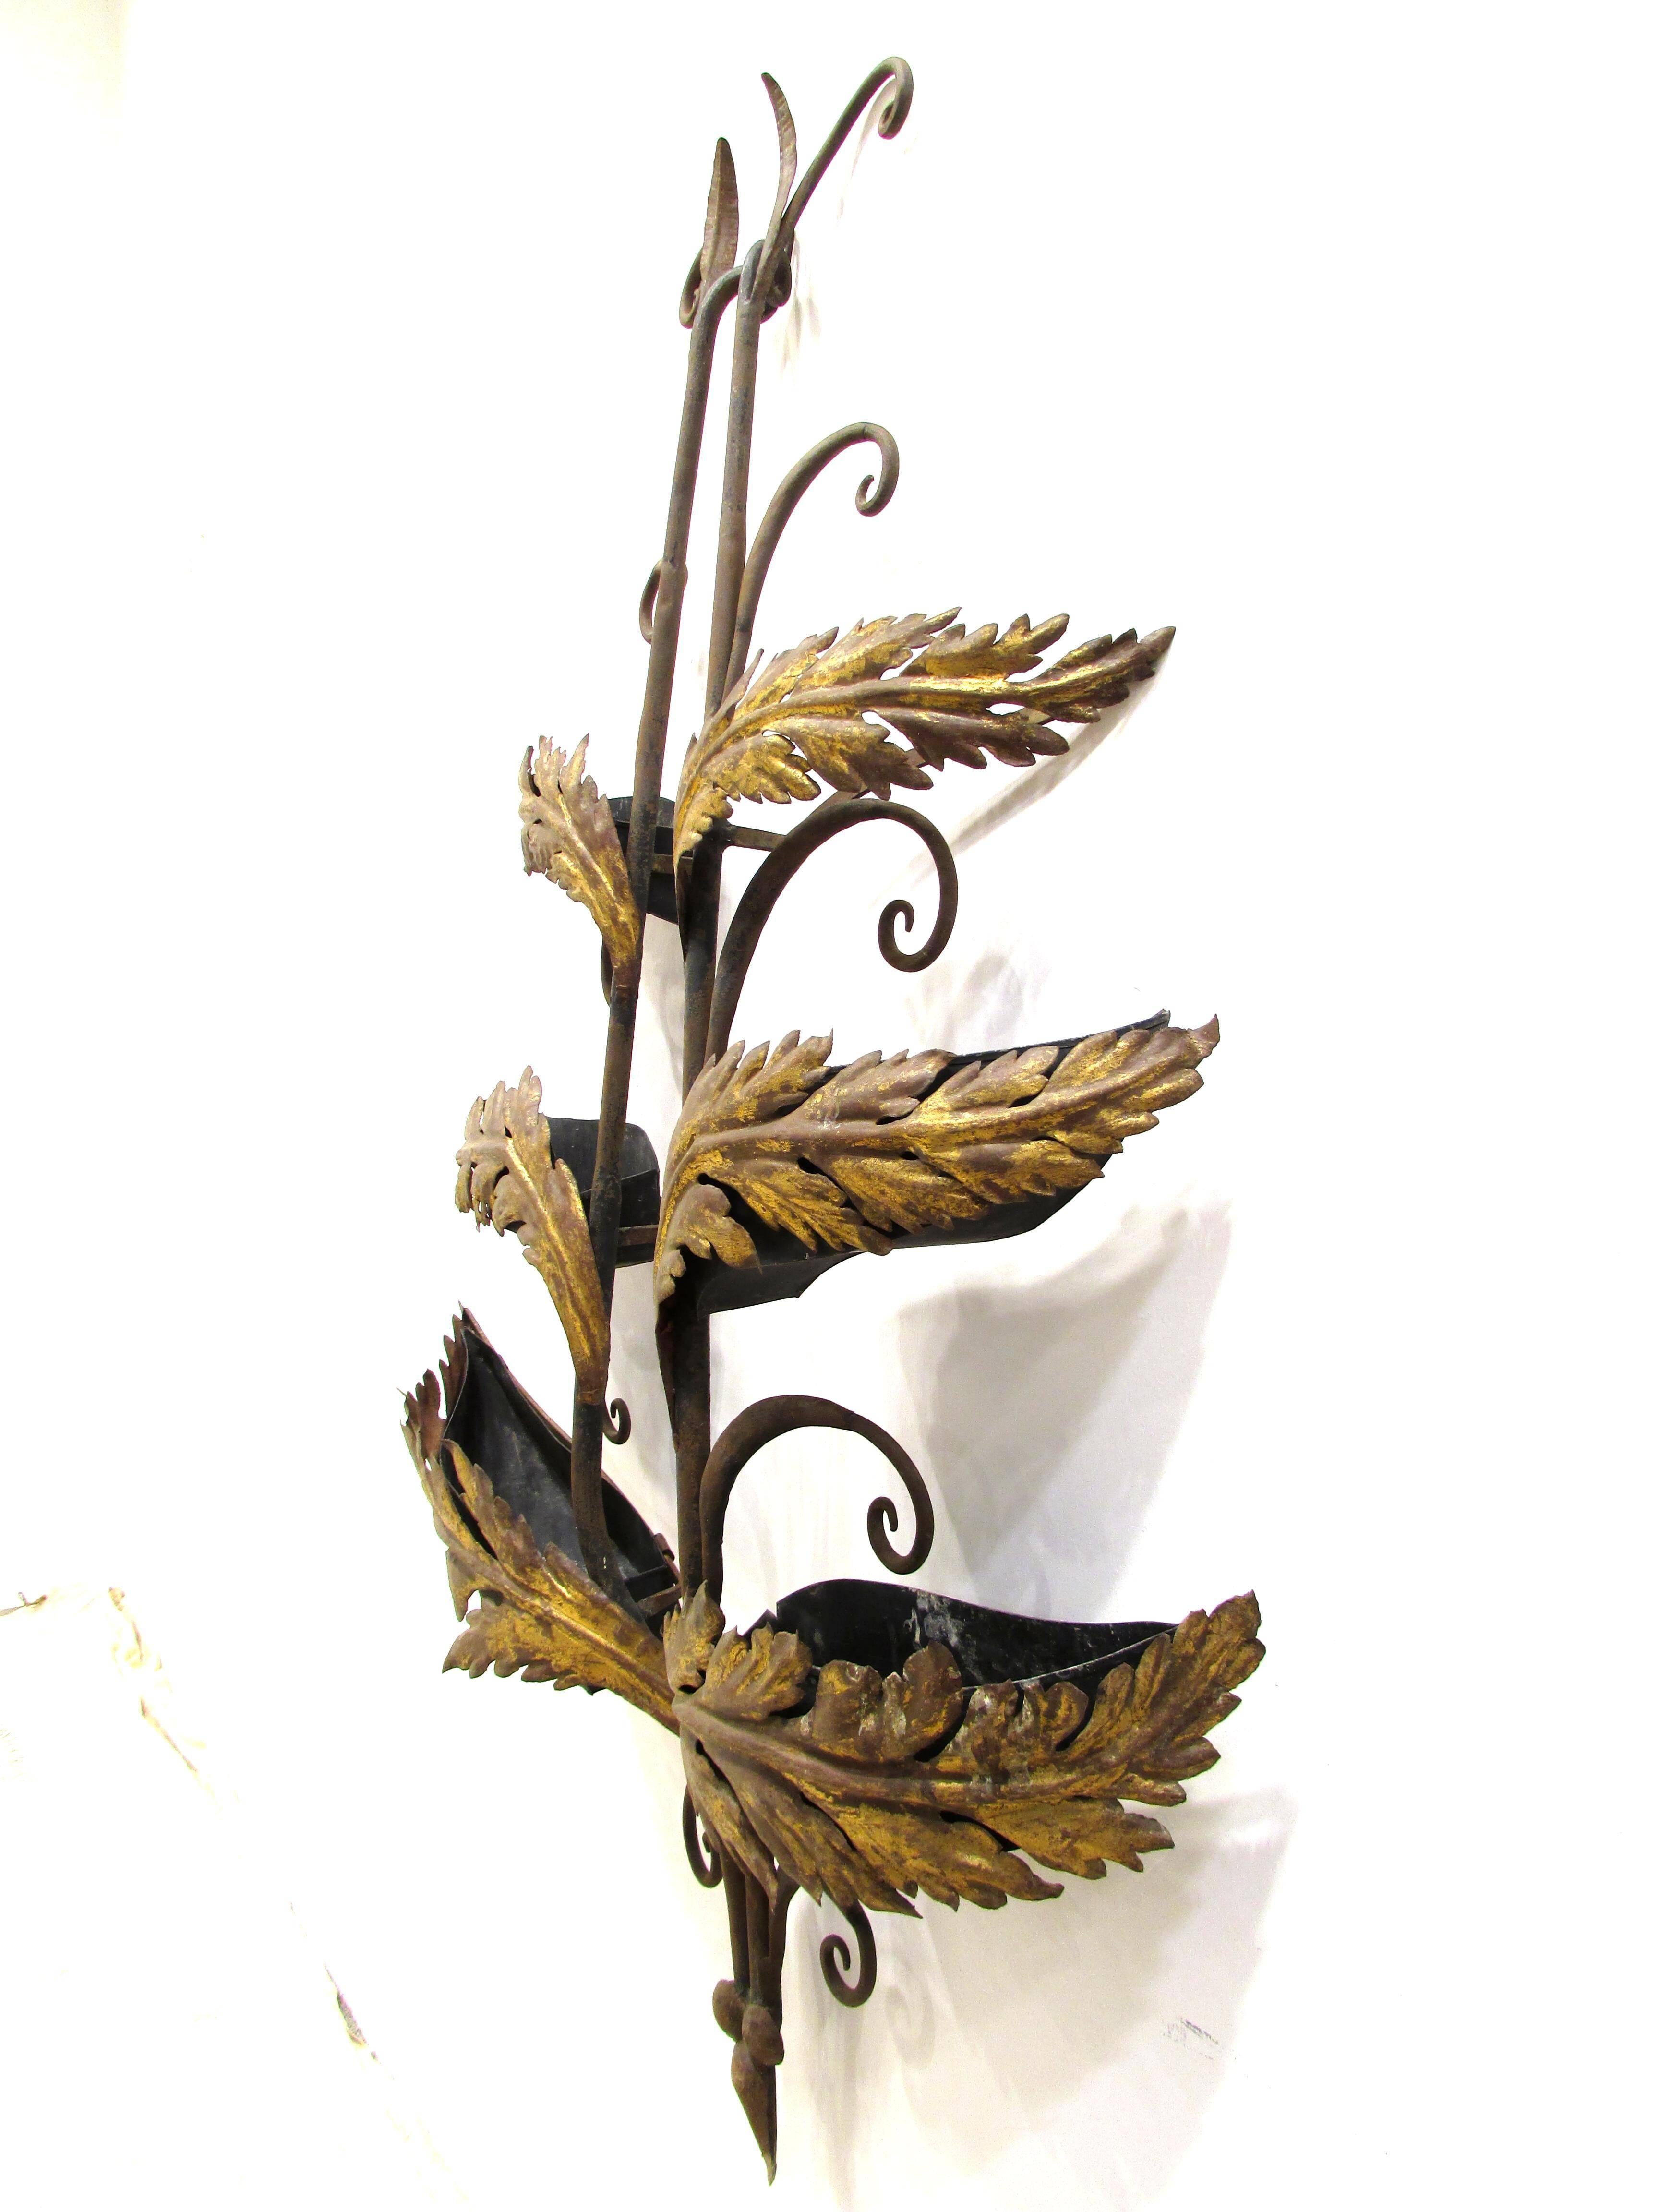 Handmade hand-wrought iron garden wall hanging sculpture with gilt leaves has inset metal containers being the gilt leaves which once held live plants or moss.